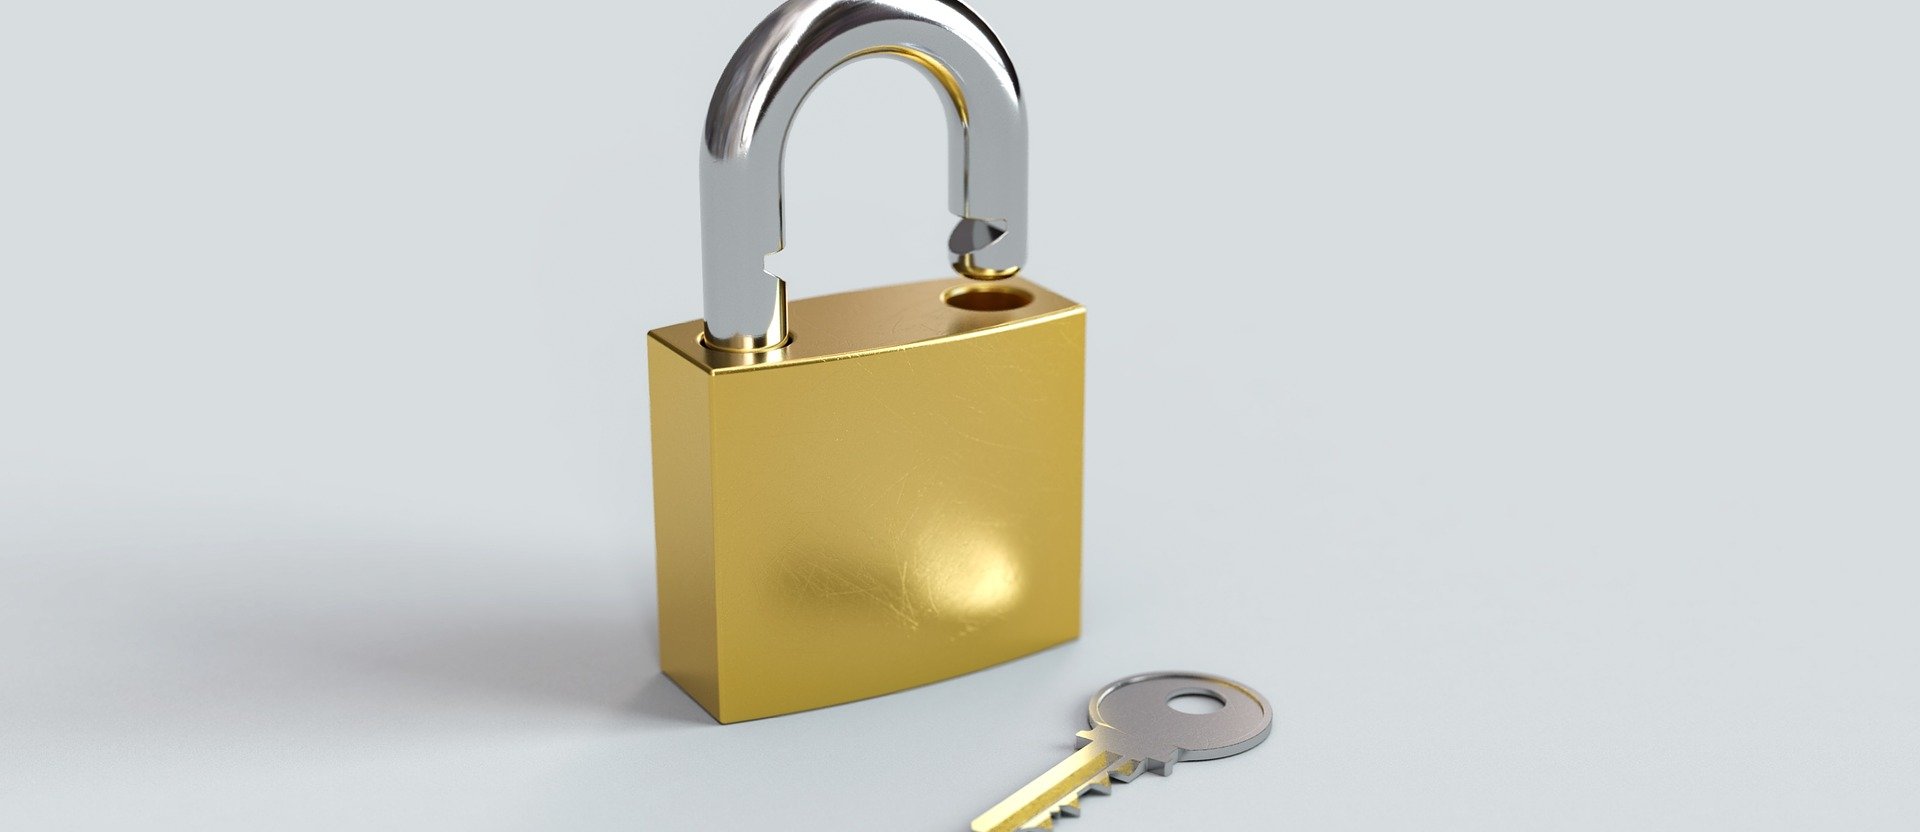 An open padlock and a key